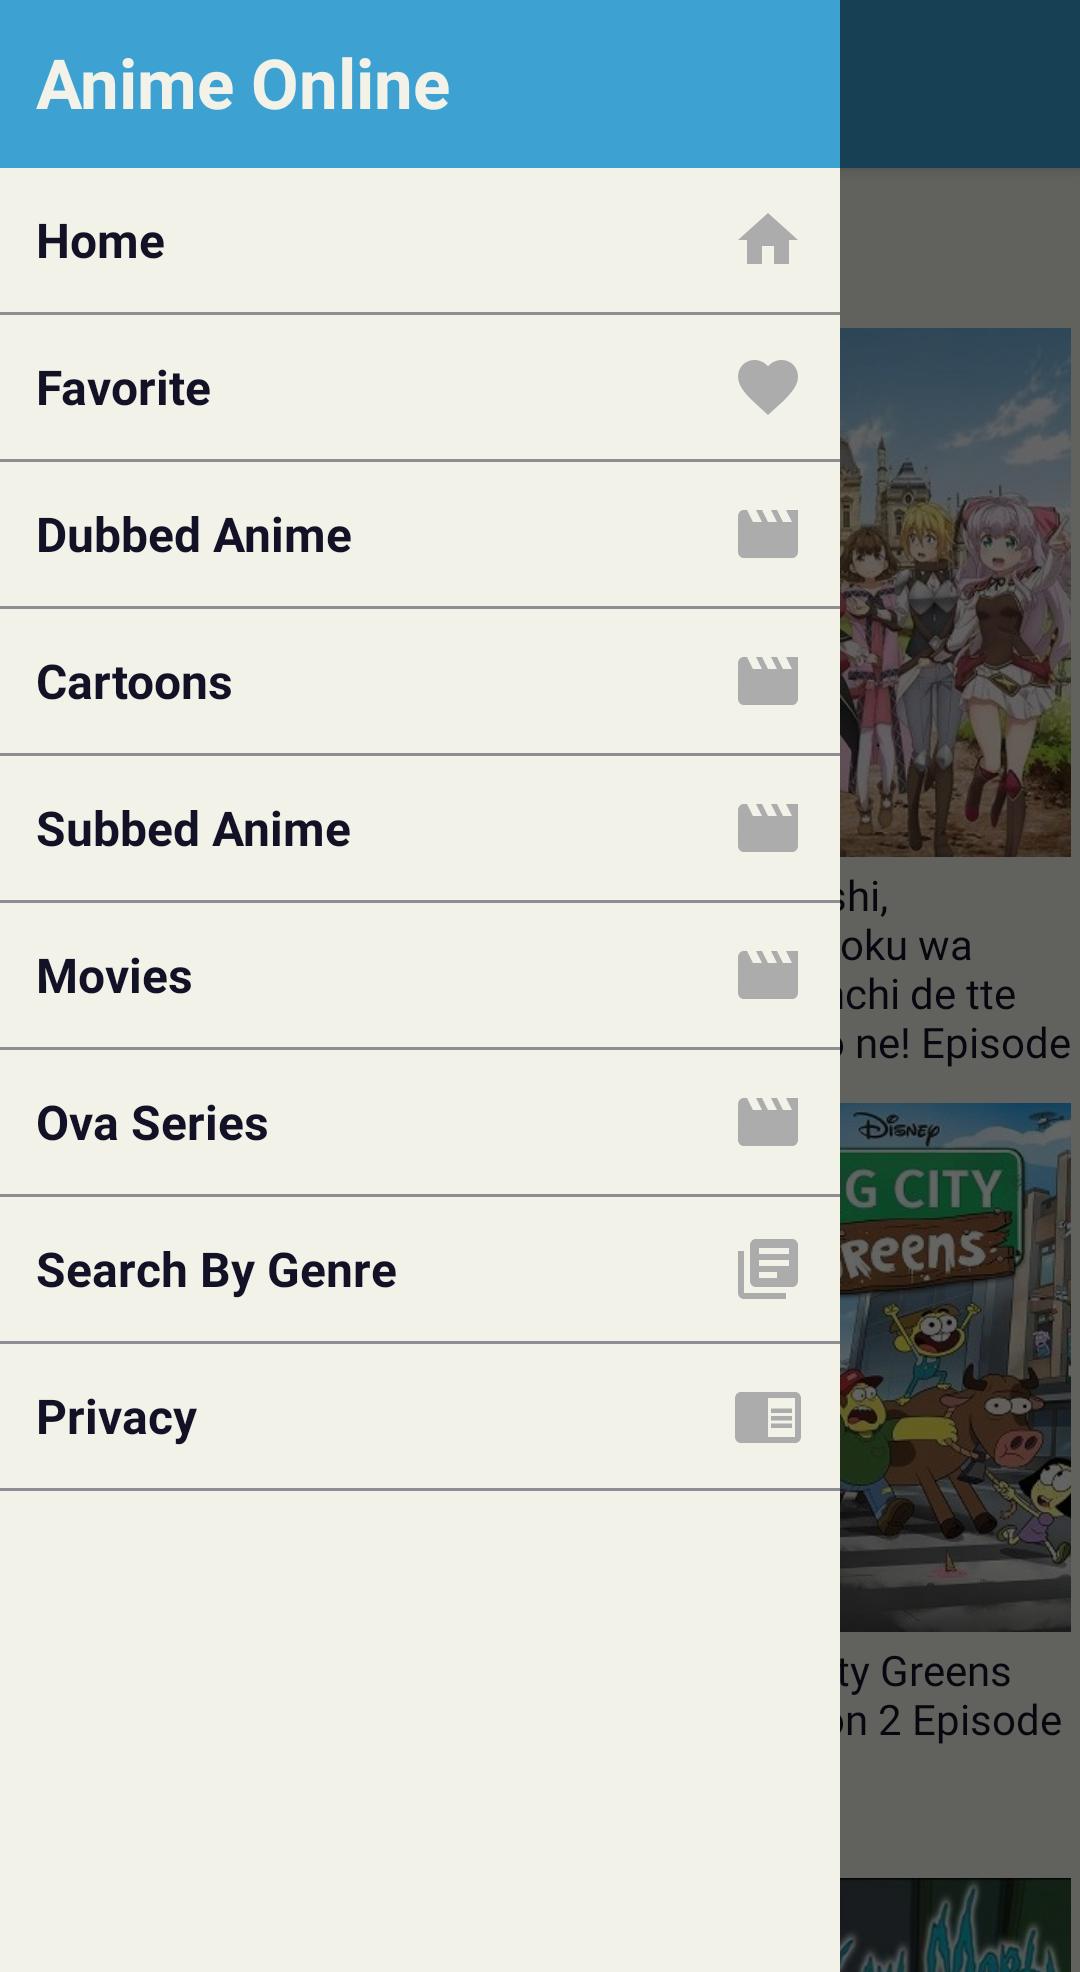 Anime Online Dubbed